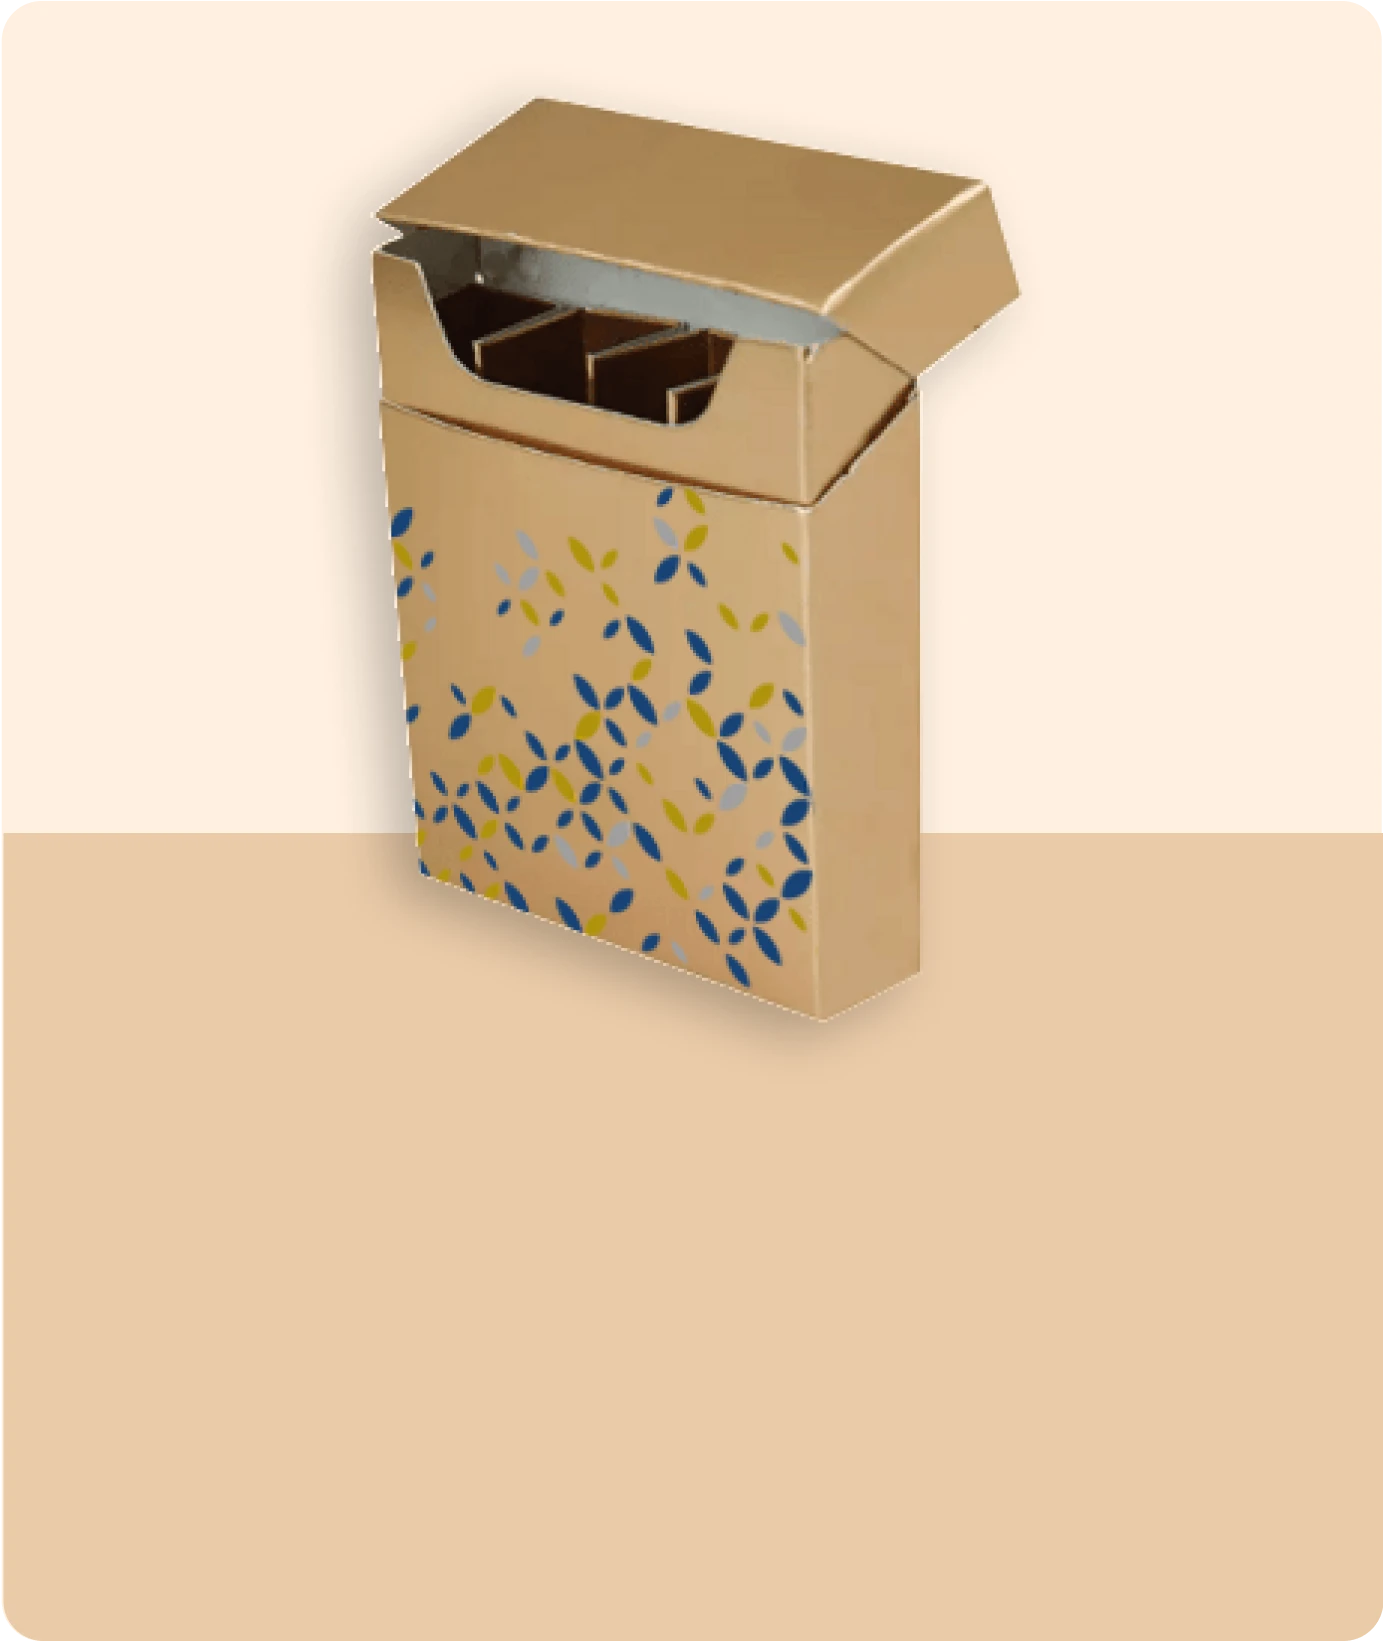 Cardboard Cigarette Boxes related products image | The Box Lane